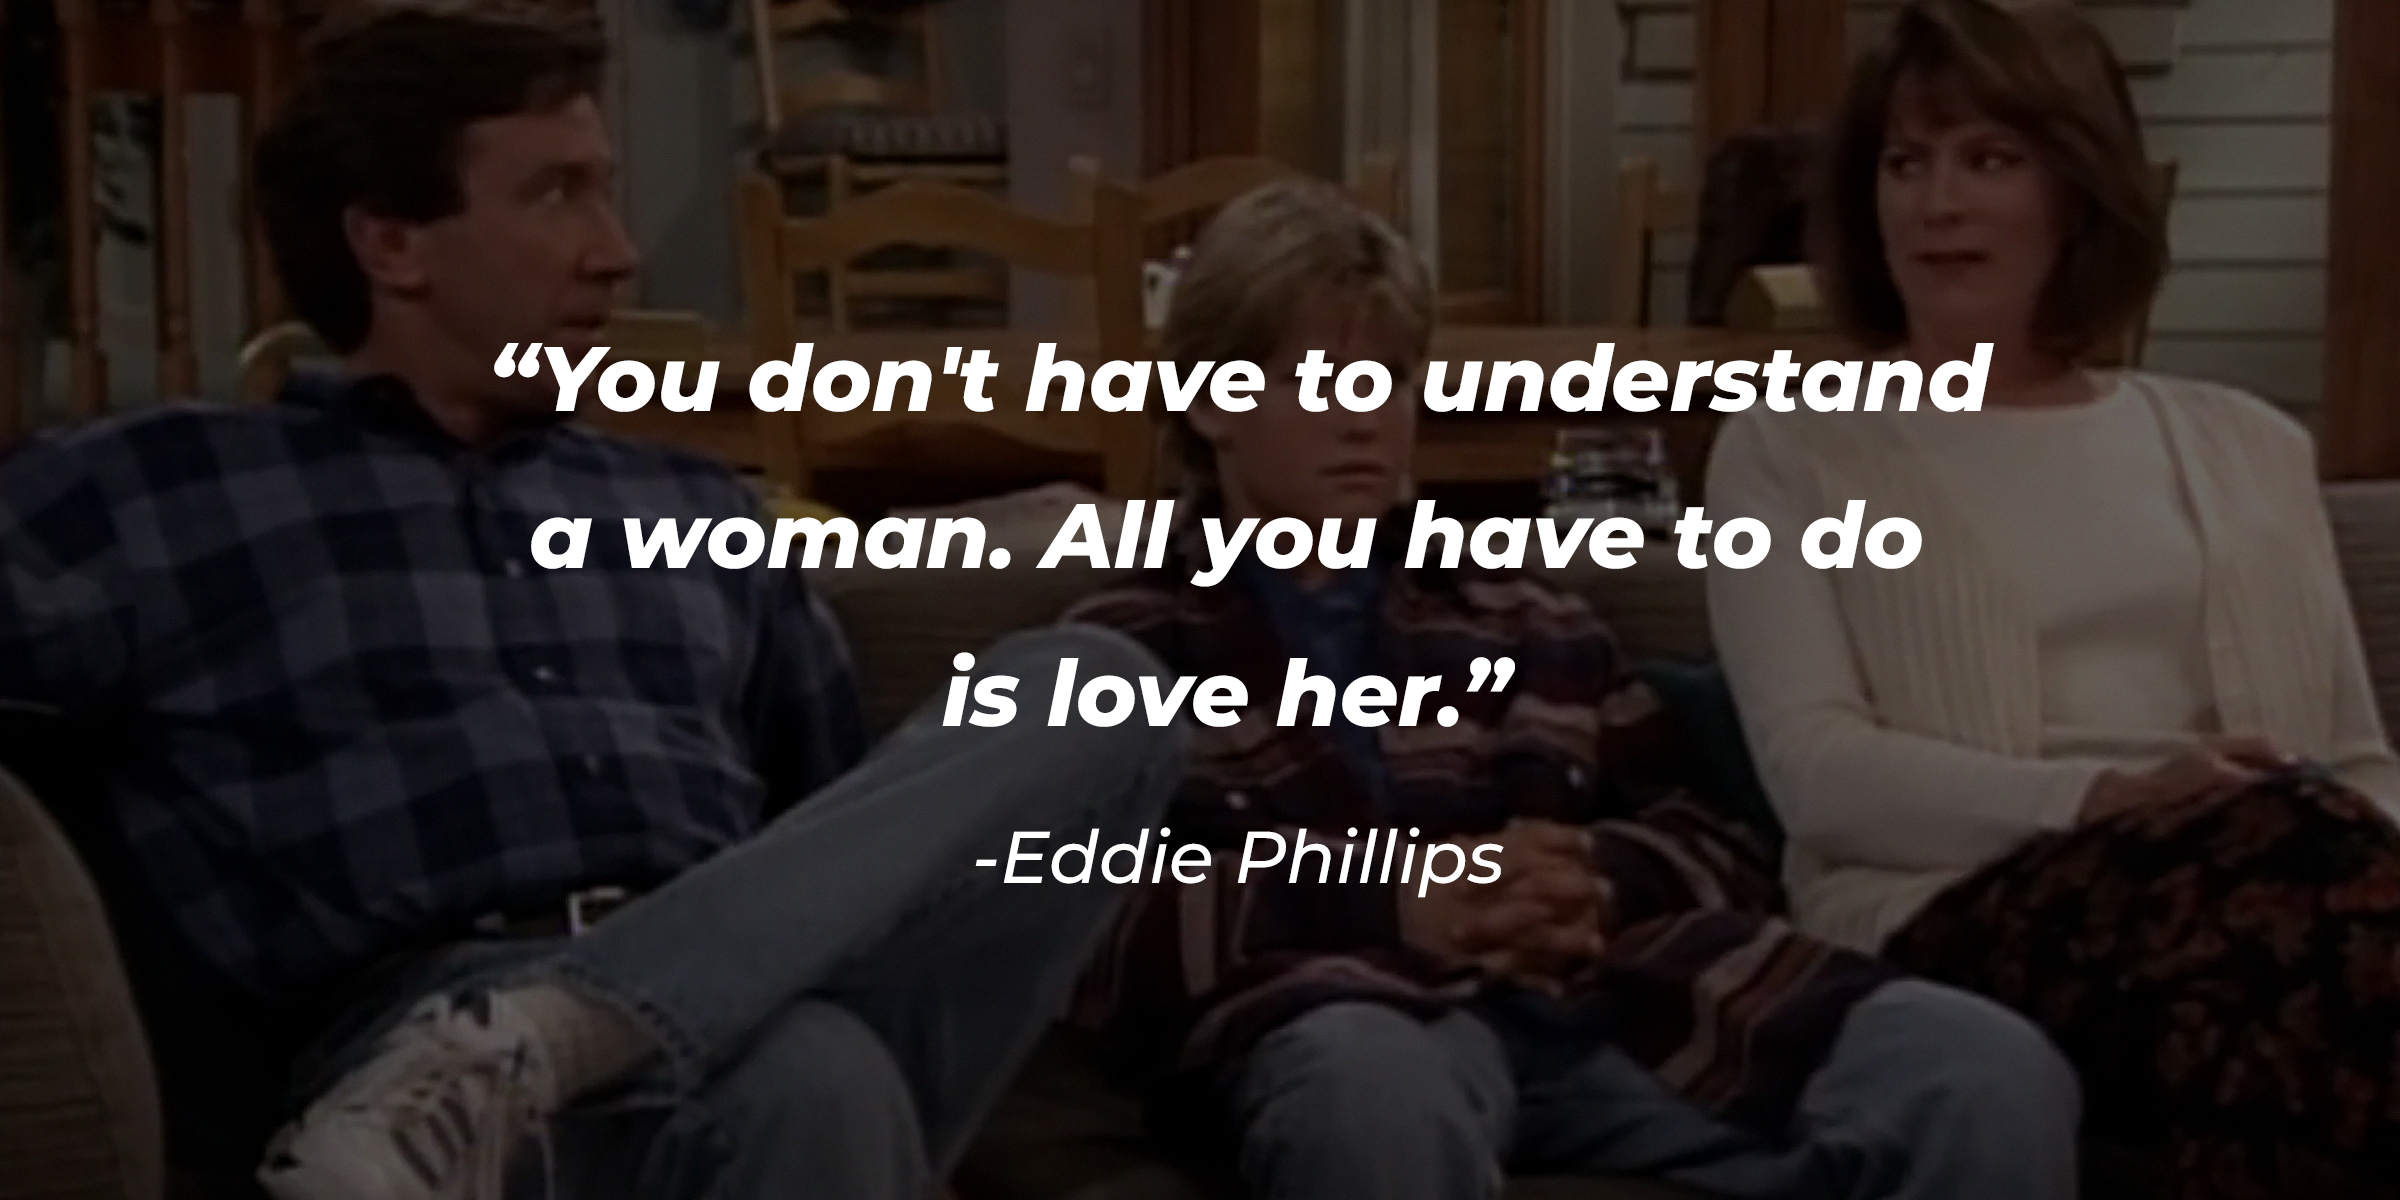 Tim, Brad and Jill, with Eddie Phillips' quote from "Home Improvement": “You don't have to understand a woman. All you have to do is love her.” | Source: youtube.com/ABCNetwork